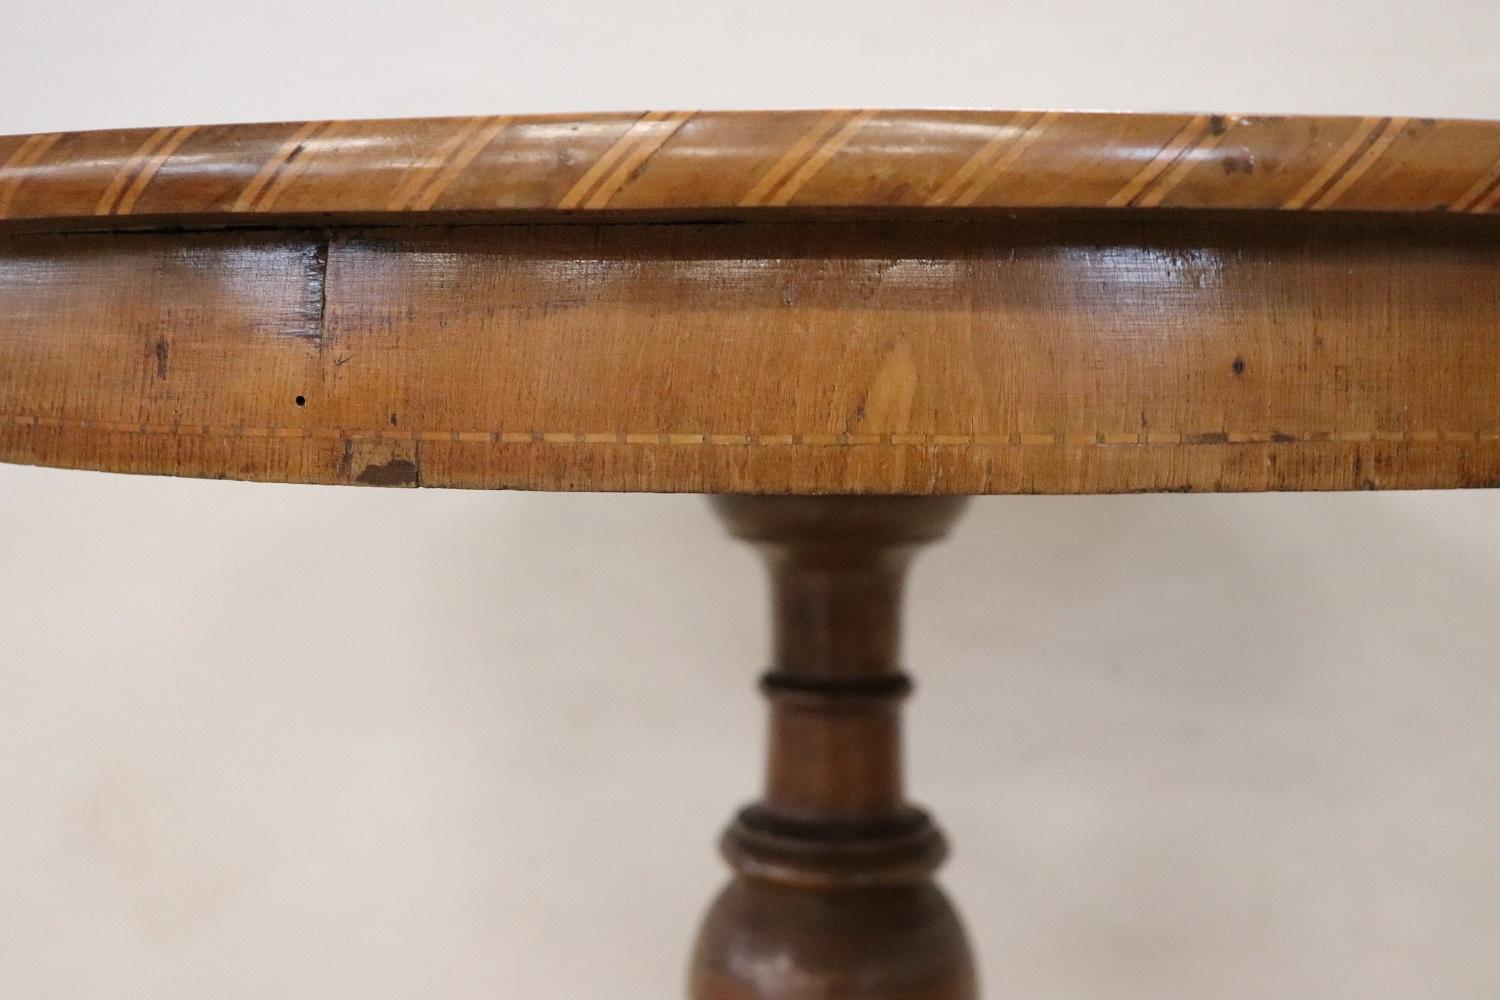 Beautiful important Louis Philippe antique round center table, 1845s. The large and solid central stem in turned walnut. The walnut inlay top is of great value. The table is characterized by a refined inlaid decoration made using small pieces of